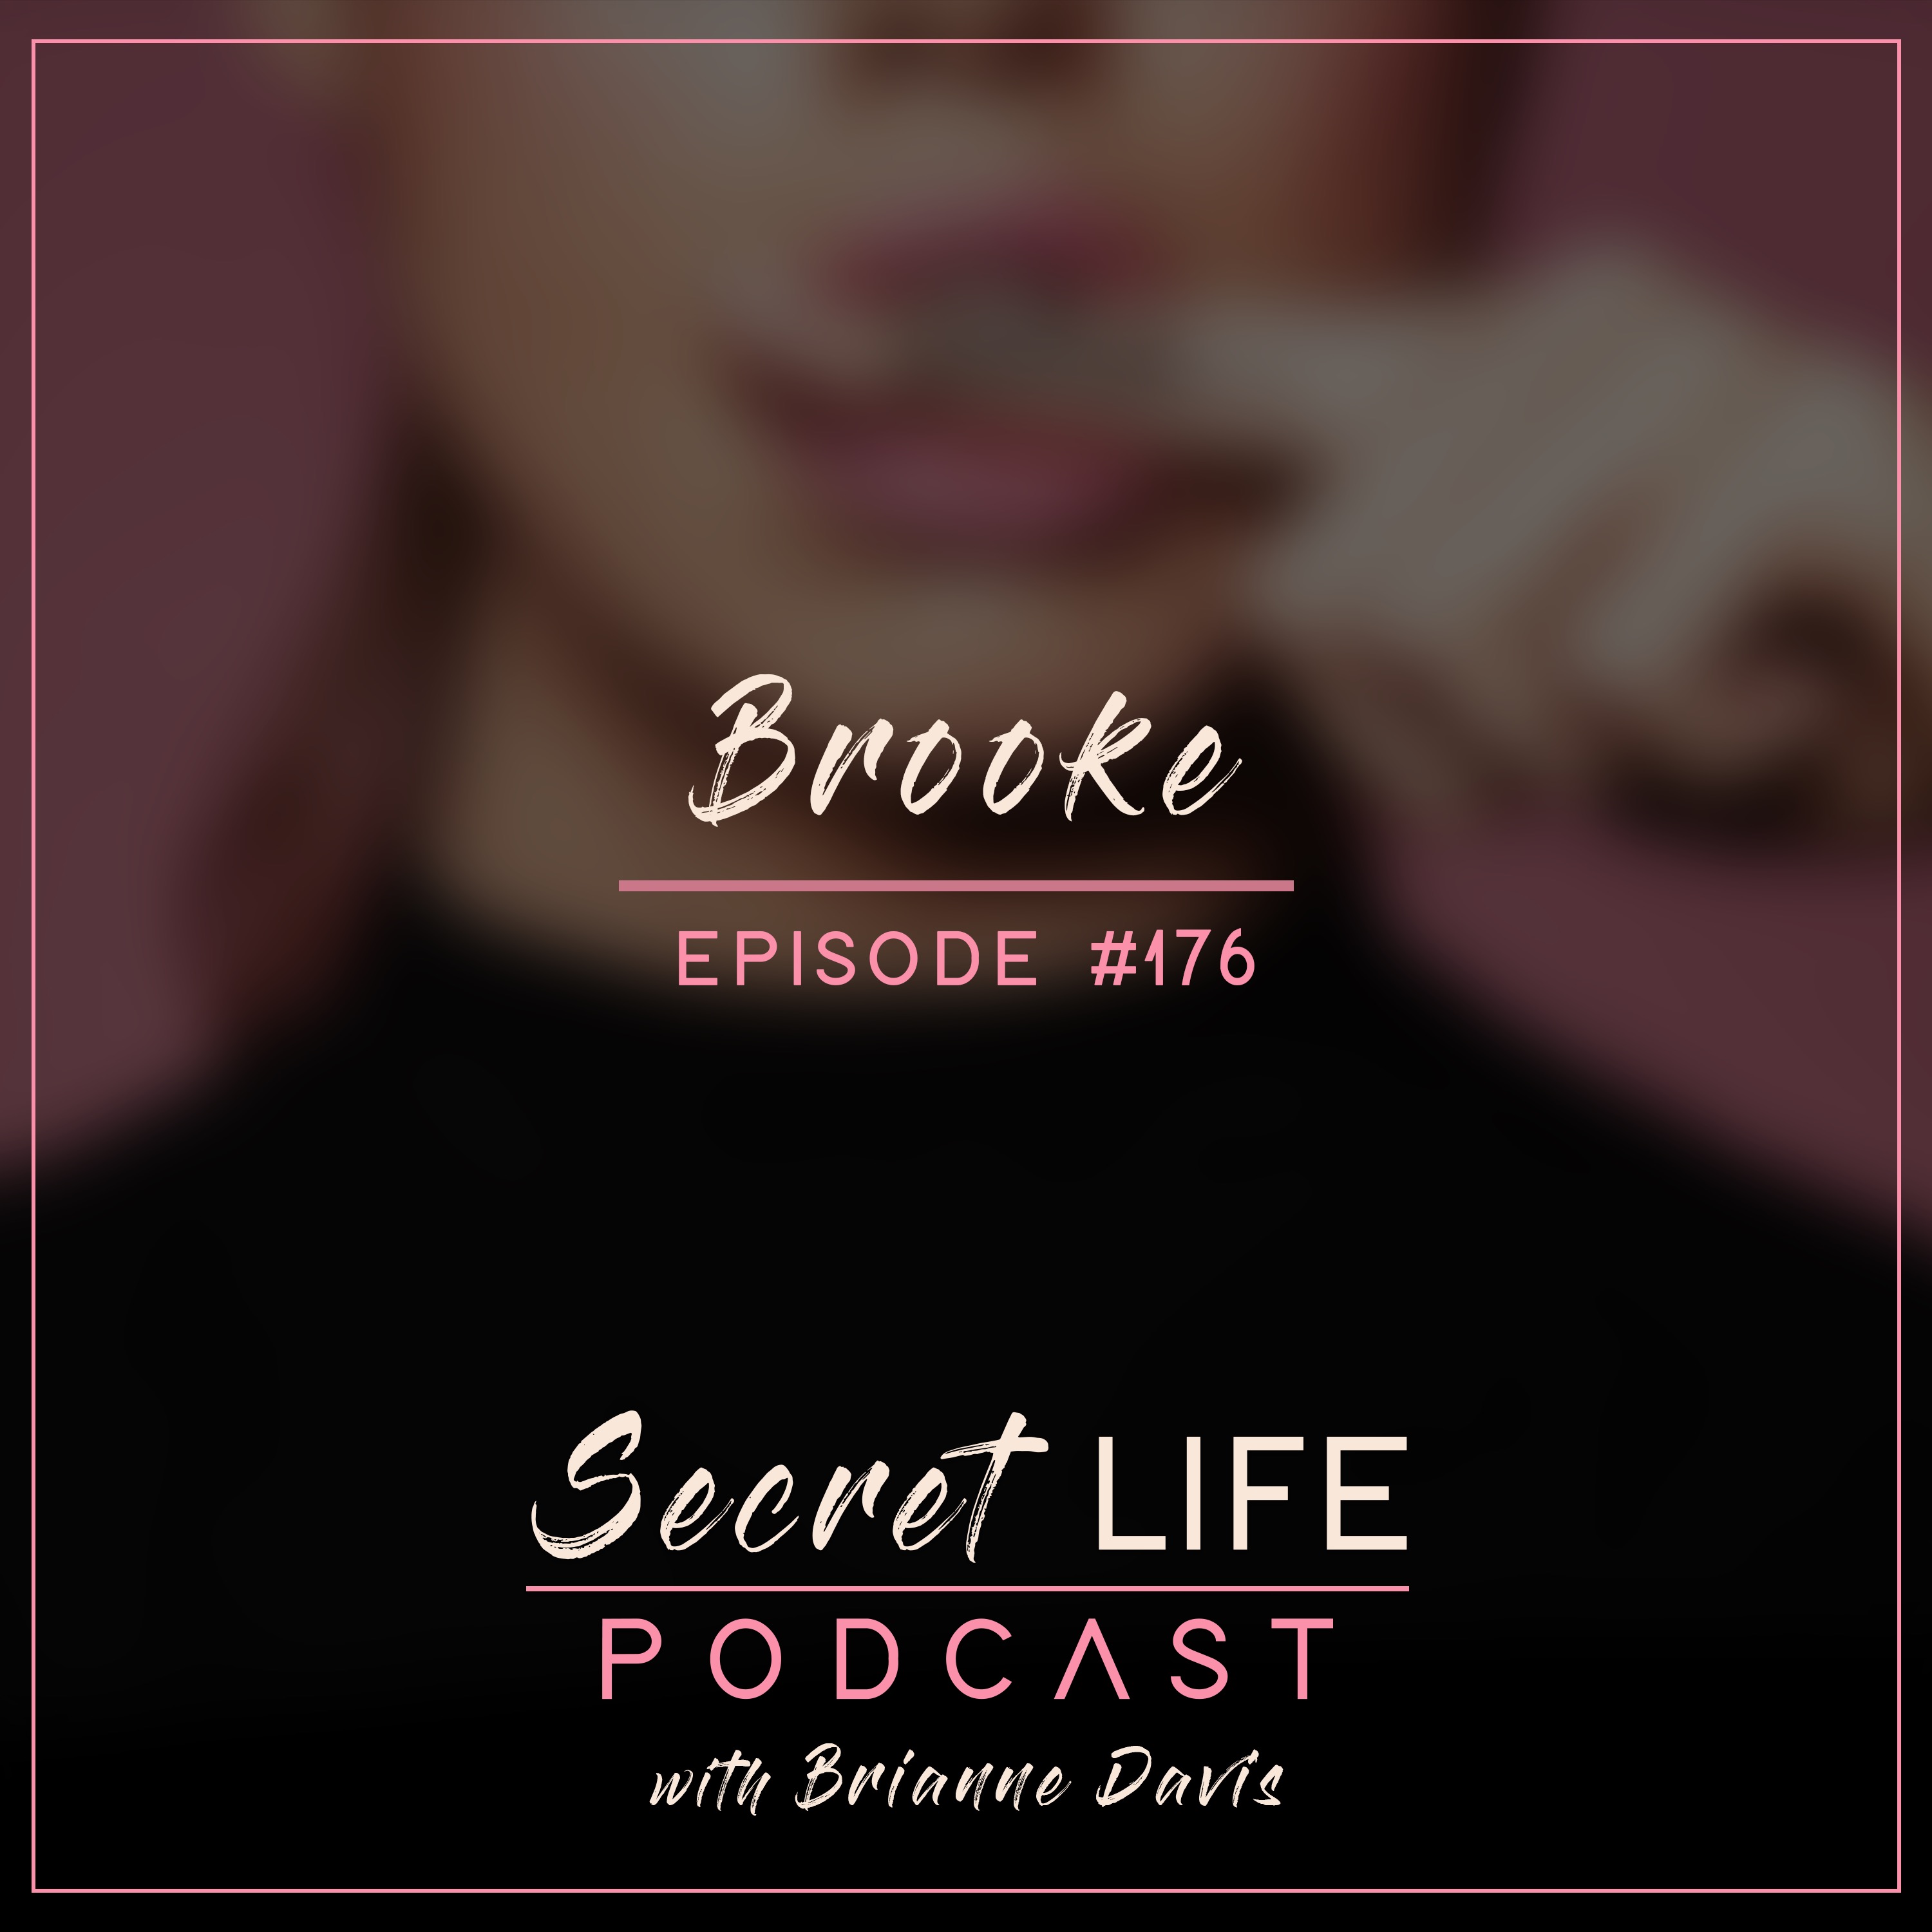 Brooke: I Might Be a Sex & Love Addict; I've Slept with Over 100 People